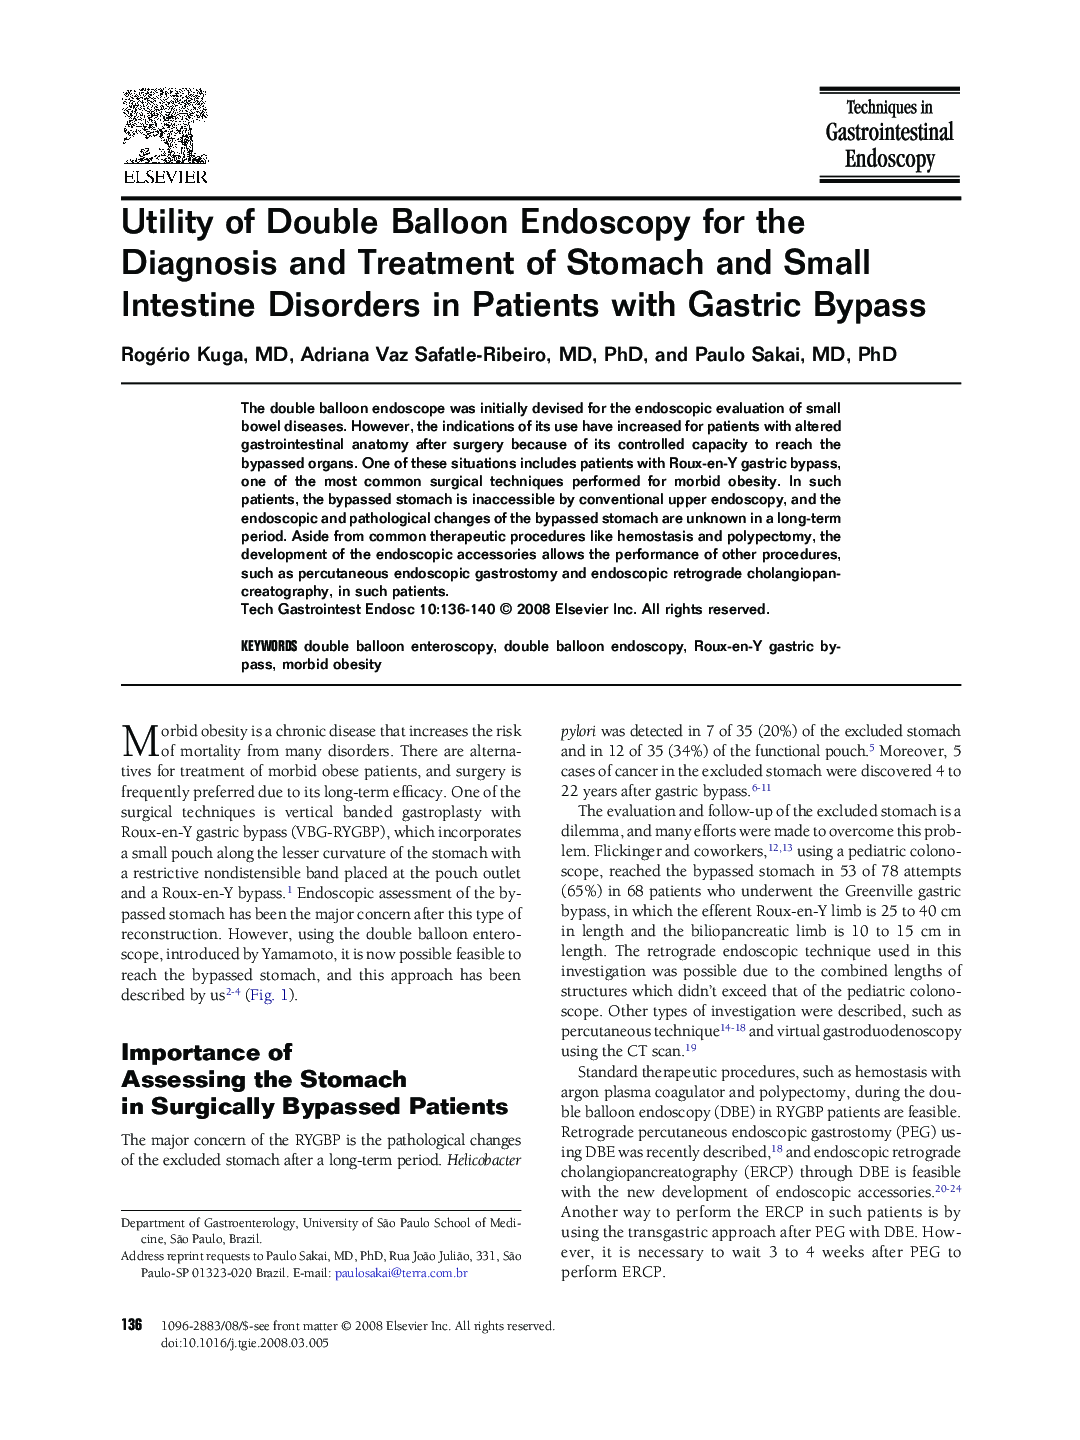 Utility of Double Balloon Endoscopy for the Diagnosis and Treatment of Stomach and Small Intestine Disorders in Patients with Gastric Bypass